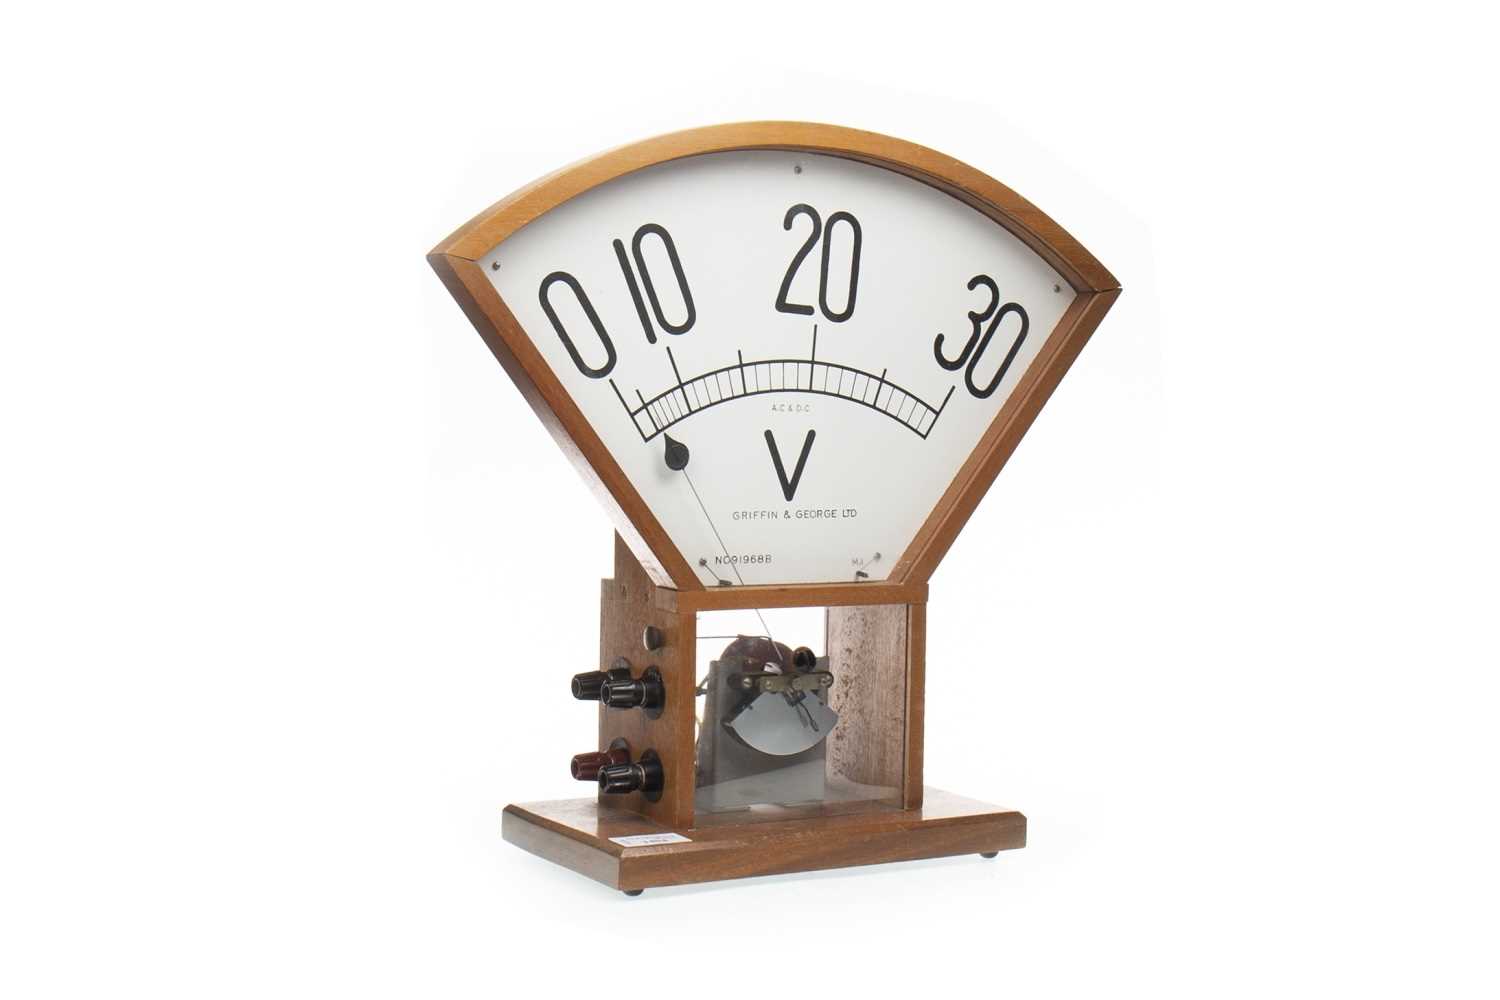 Lot 1404 - AN EARLY 20TH CENTURY GRIFFIN & GEORGE VOLTMETER